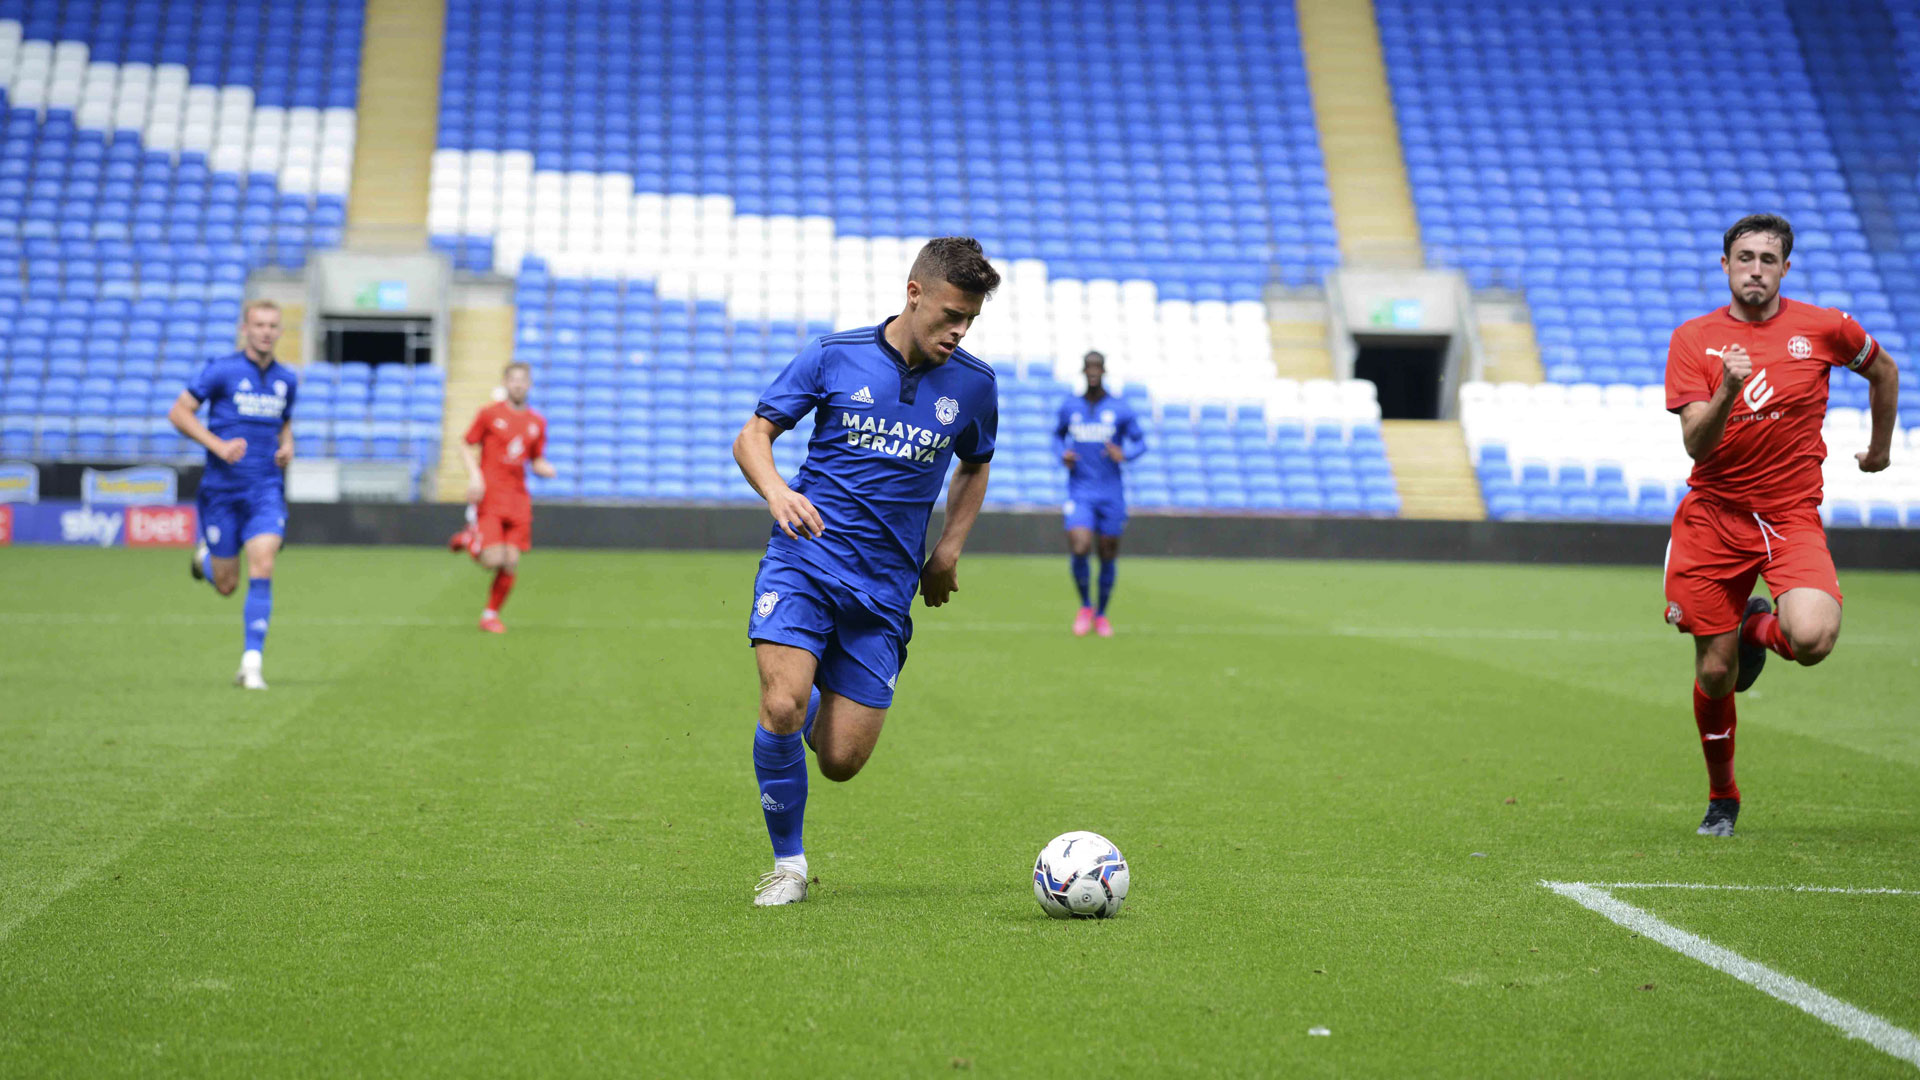 Sam Bowen in action at CCS against Wigan...